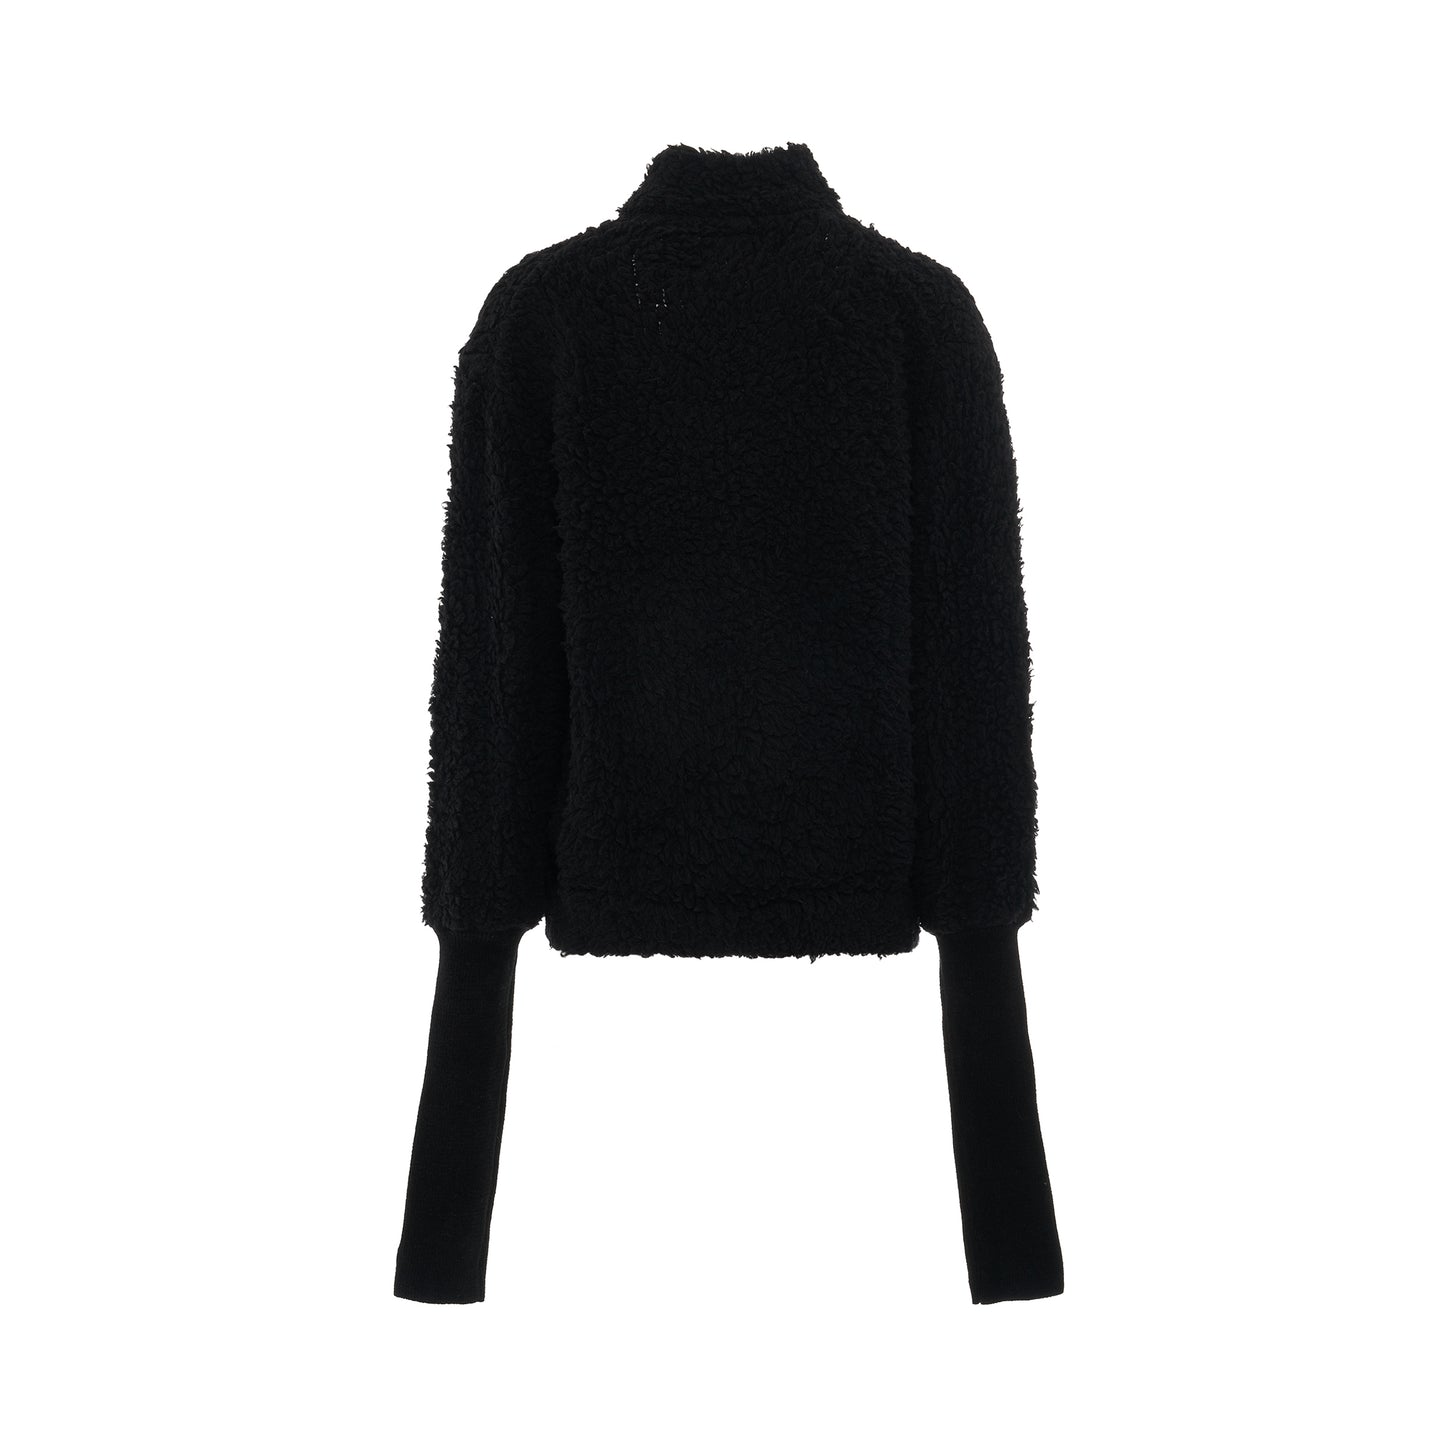 Sheep Wannabe Knit Pullover in Black